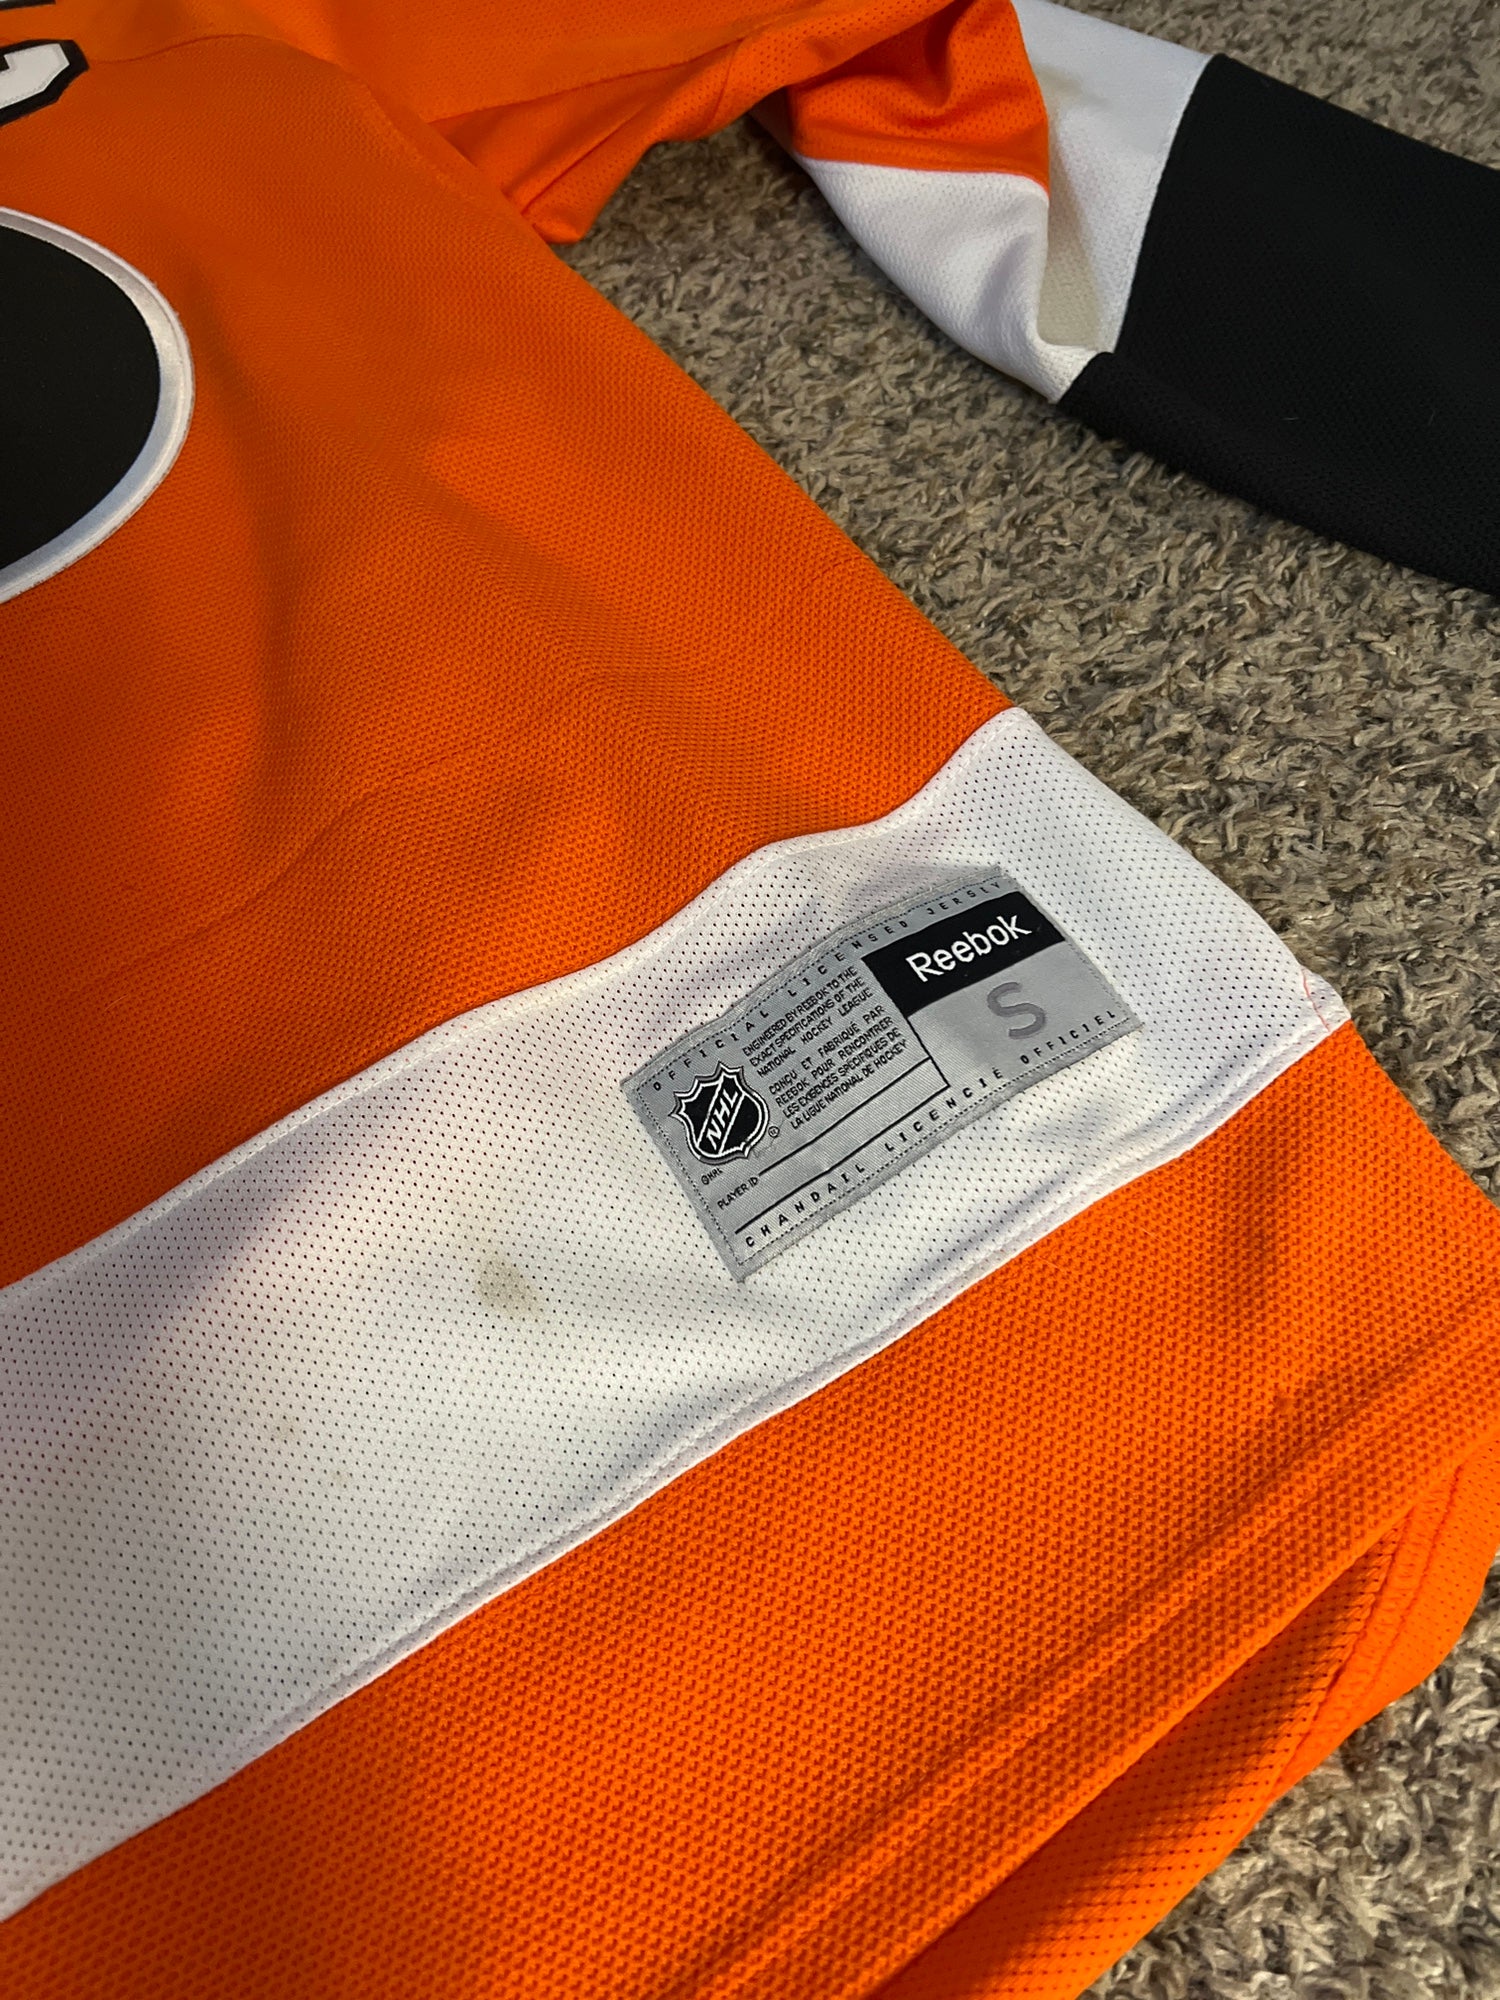 Mike Richards Philadelphia Flyers Home Jersey - Reebok Large - With Tags |  SidelineSwap